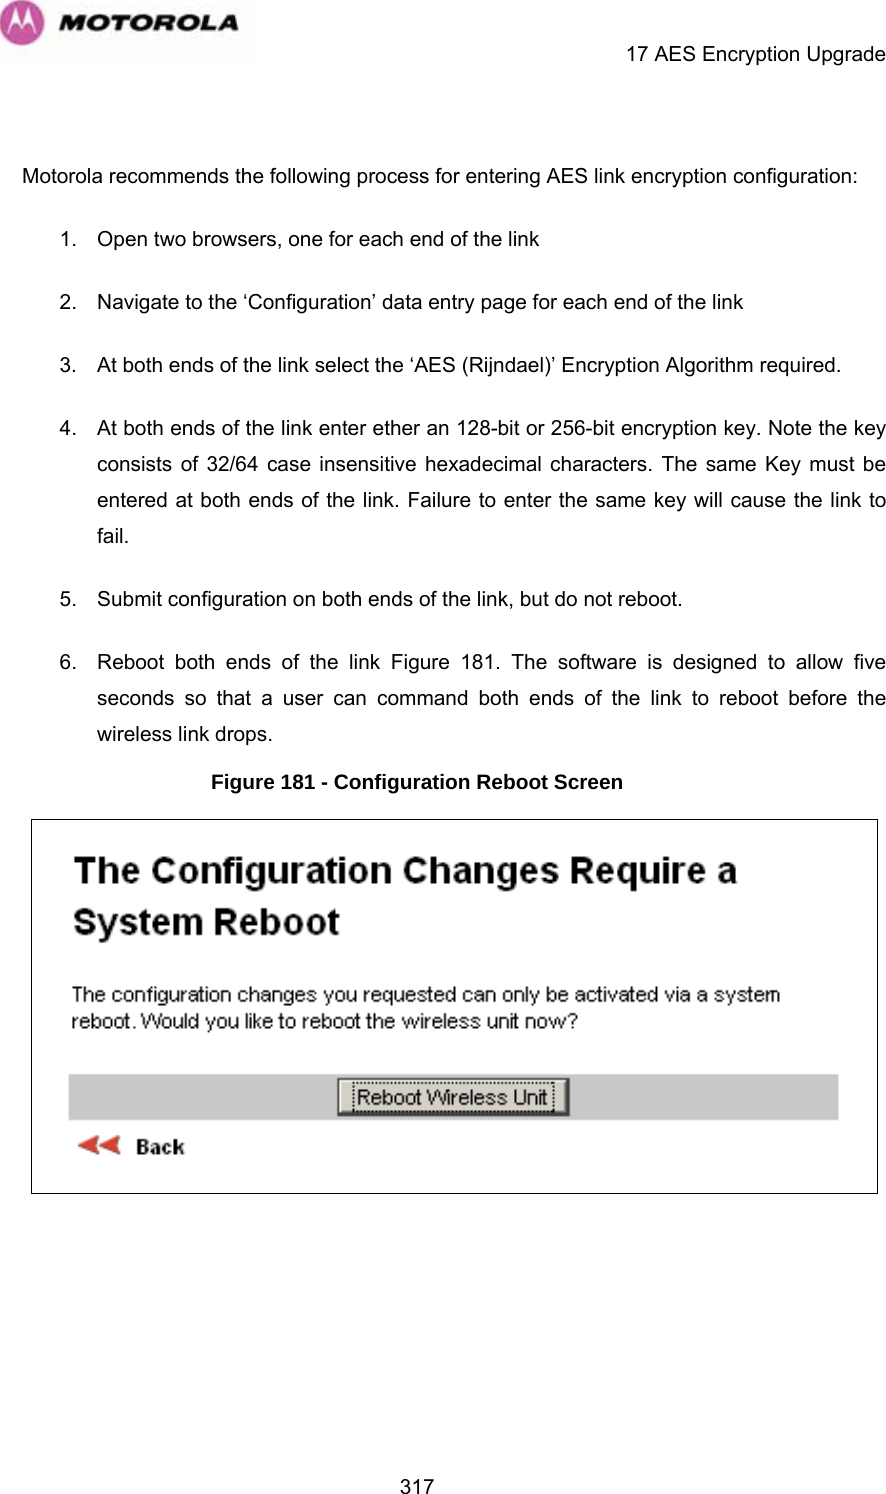     17 AES Encryption Upgrade  317 Motorola recommends the following process for entering AES link encryption configuration: 1.  Open two browsers, one for each end of the link 2.  Navigate to the ‘Configuration’ data entry page for each end of the link 3.  At both ends of the link select the ‘AES (Rijndael)’ Encryption Algorithm required. 4.  At both ends of the link enter ether an 128-bit or 256-bit encryption key. Note the key consists of 32/64 case insensitive hexadecimal characters. The same Key must be entered at both ends of the link. Failure to enter the same key will cause the link to fail. 5.  Submit configuration on both ends of the link, but do not reboot. 6.  Reboot both ends of the link Figure 181. The software is designed to allow five seconds so that a user can command both ends of the link to reboot before the wireless link drops. Figure 181 - Configuration Reboot Screen   